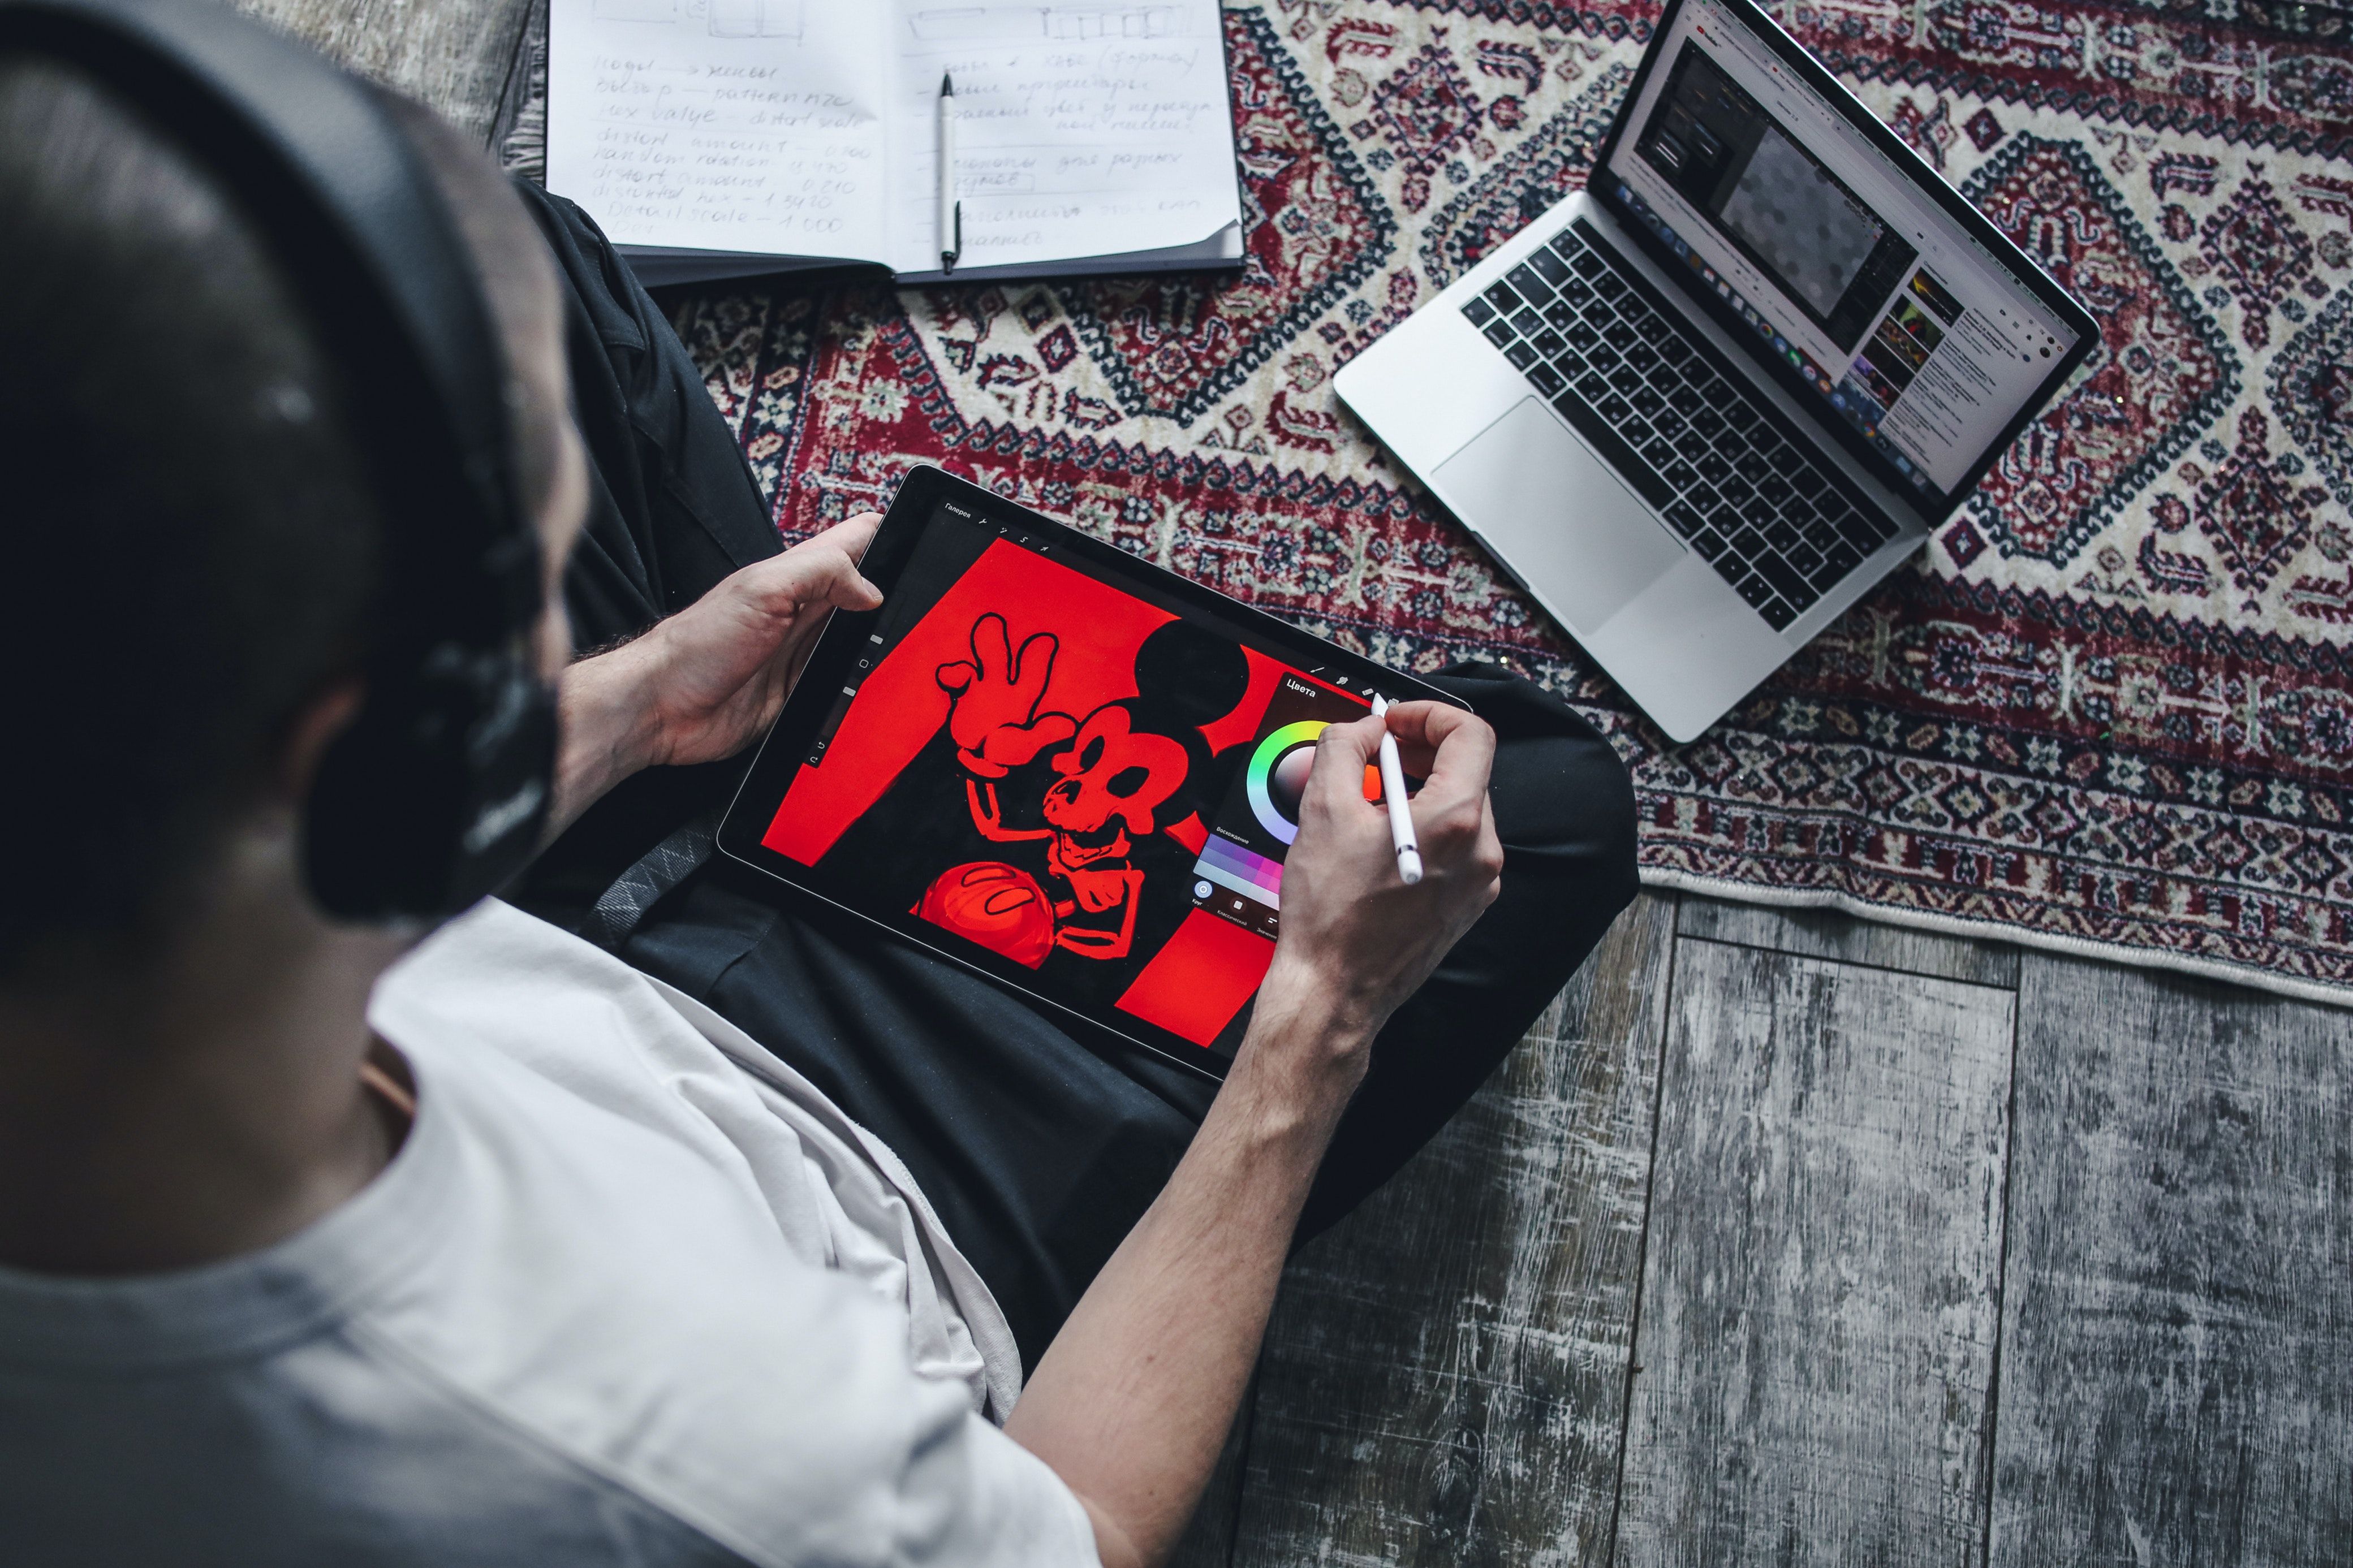 Man sitting on the floor using technology to sketch cartoons on an iPad while watching a laptop.